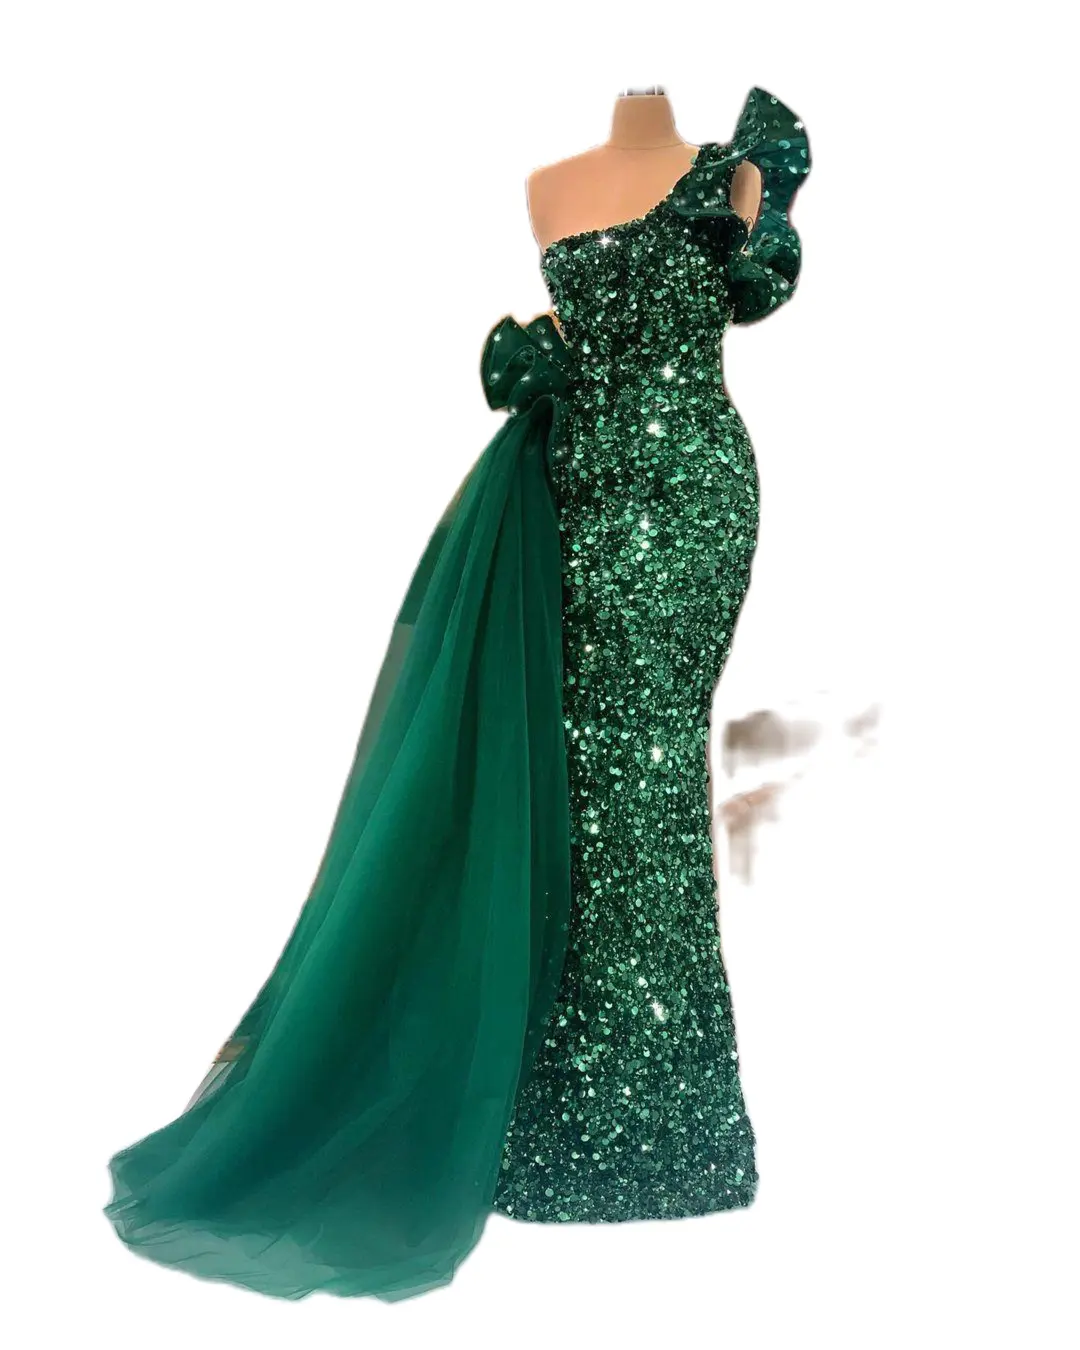 Evening Gowns Green Sequin Tube Top Ladies Formal Cocktail Party Ball Detachable plus size evening dress short party dress